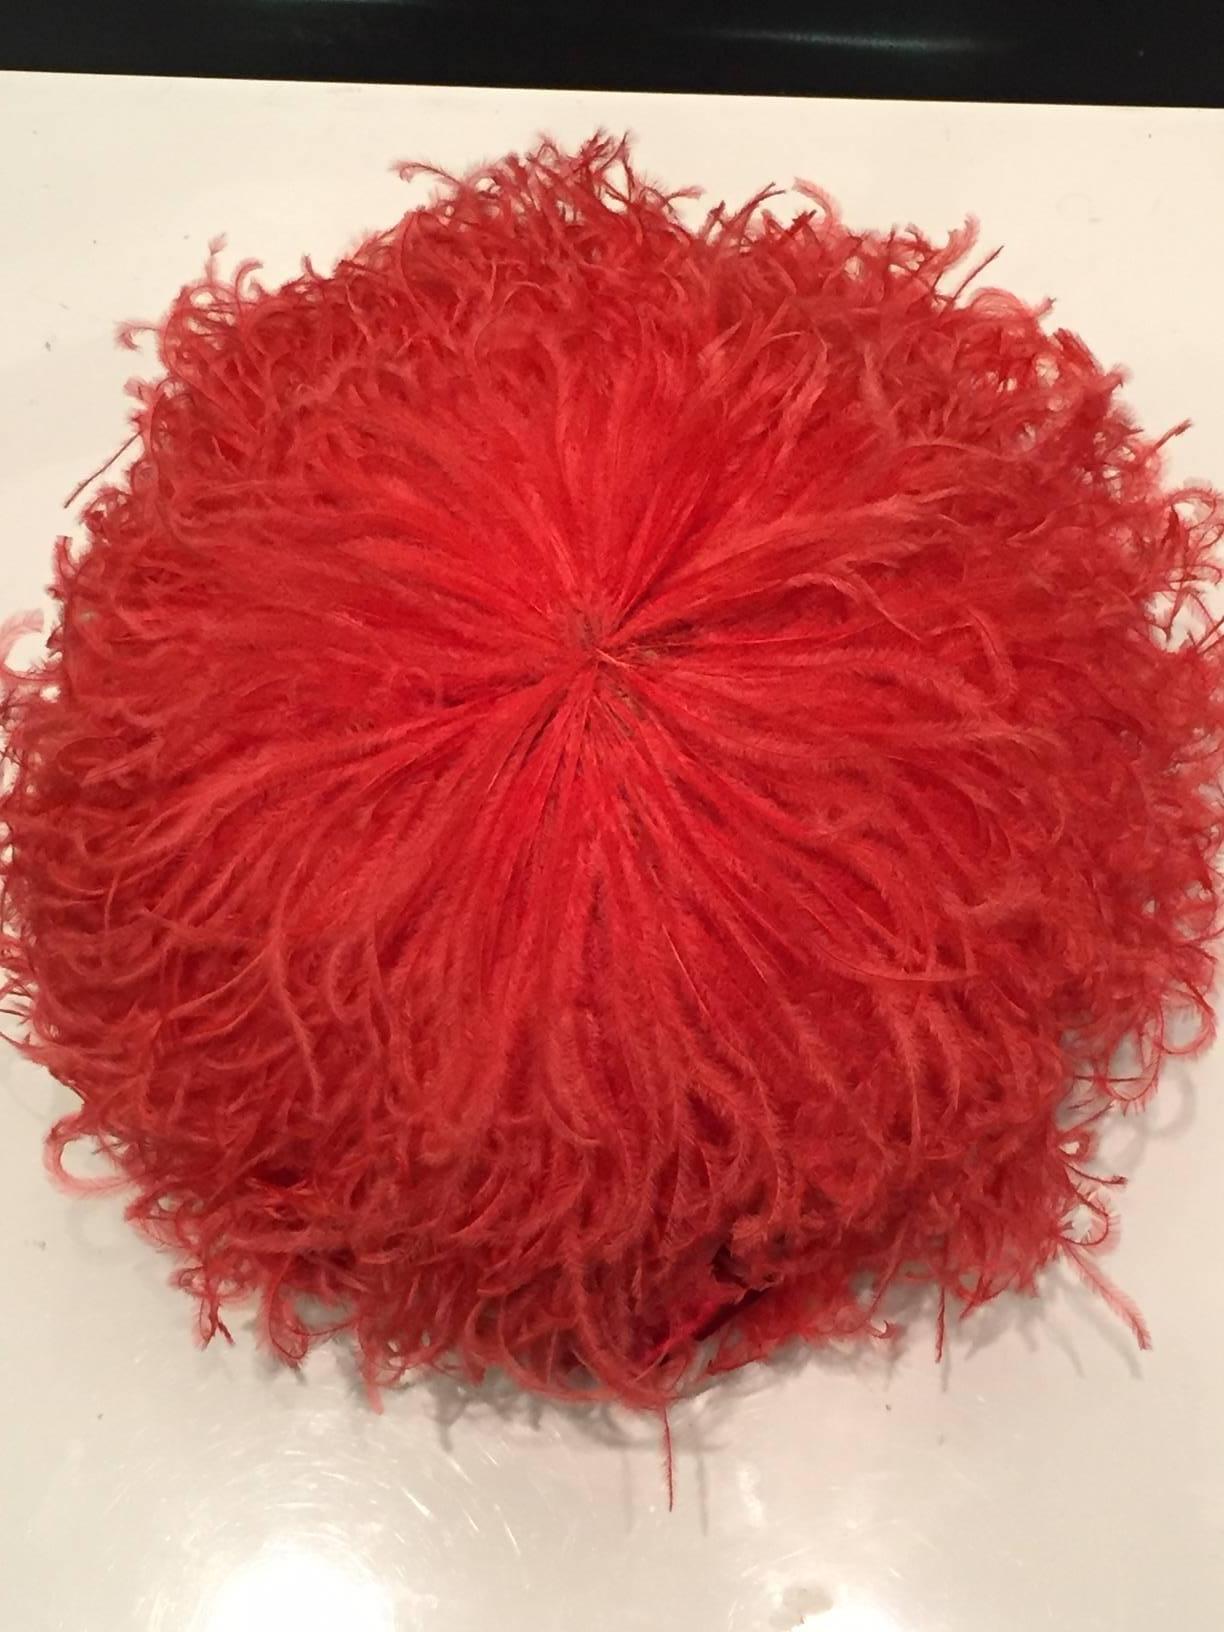 Women's 1960s Trébor Coral Red Curled Ostrich Feather Cocktail Hat